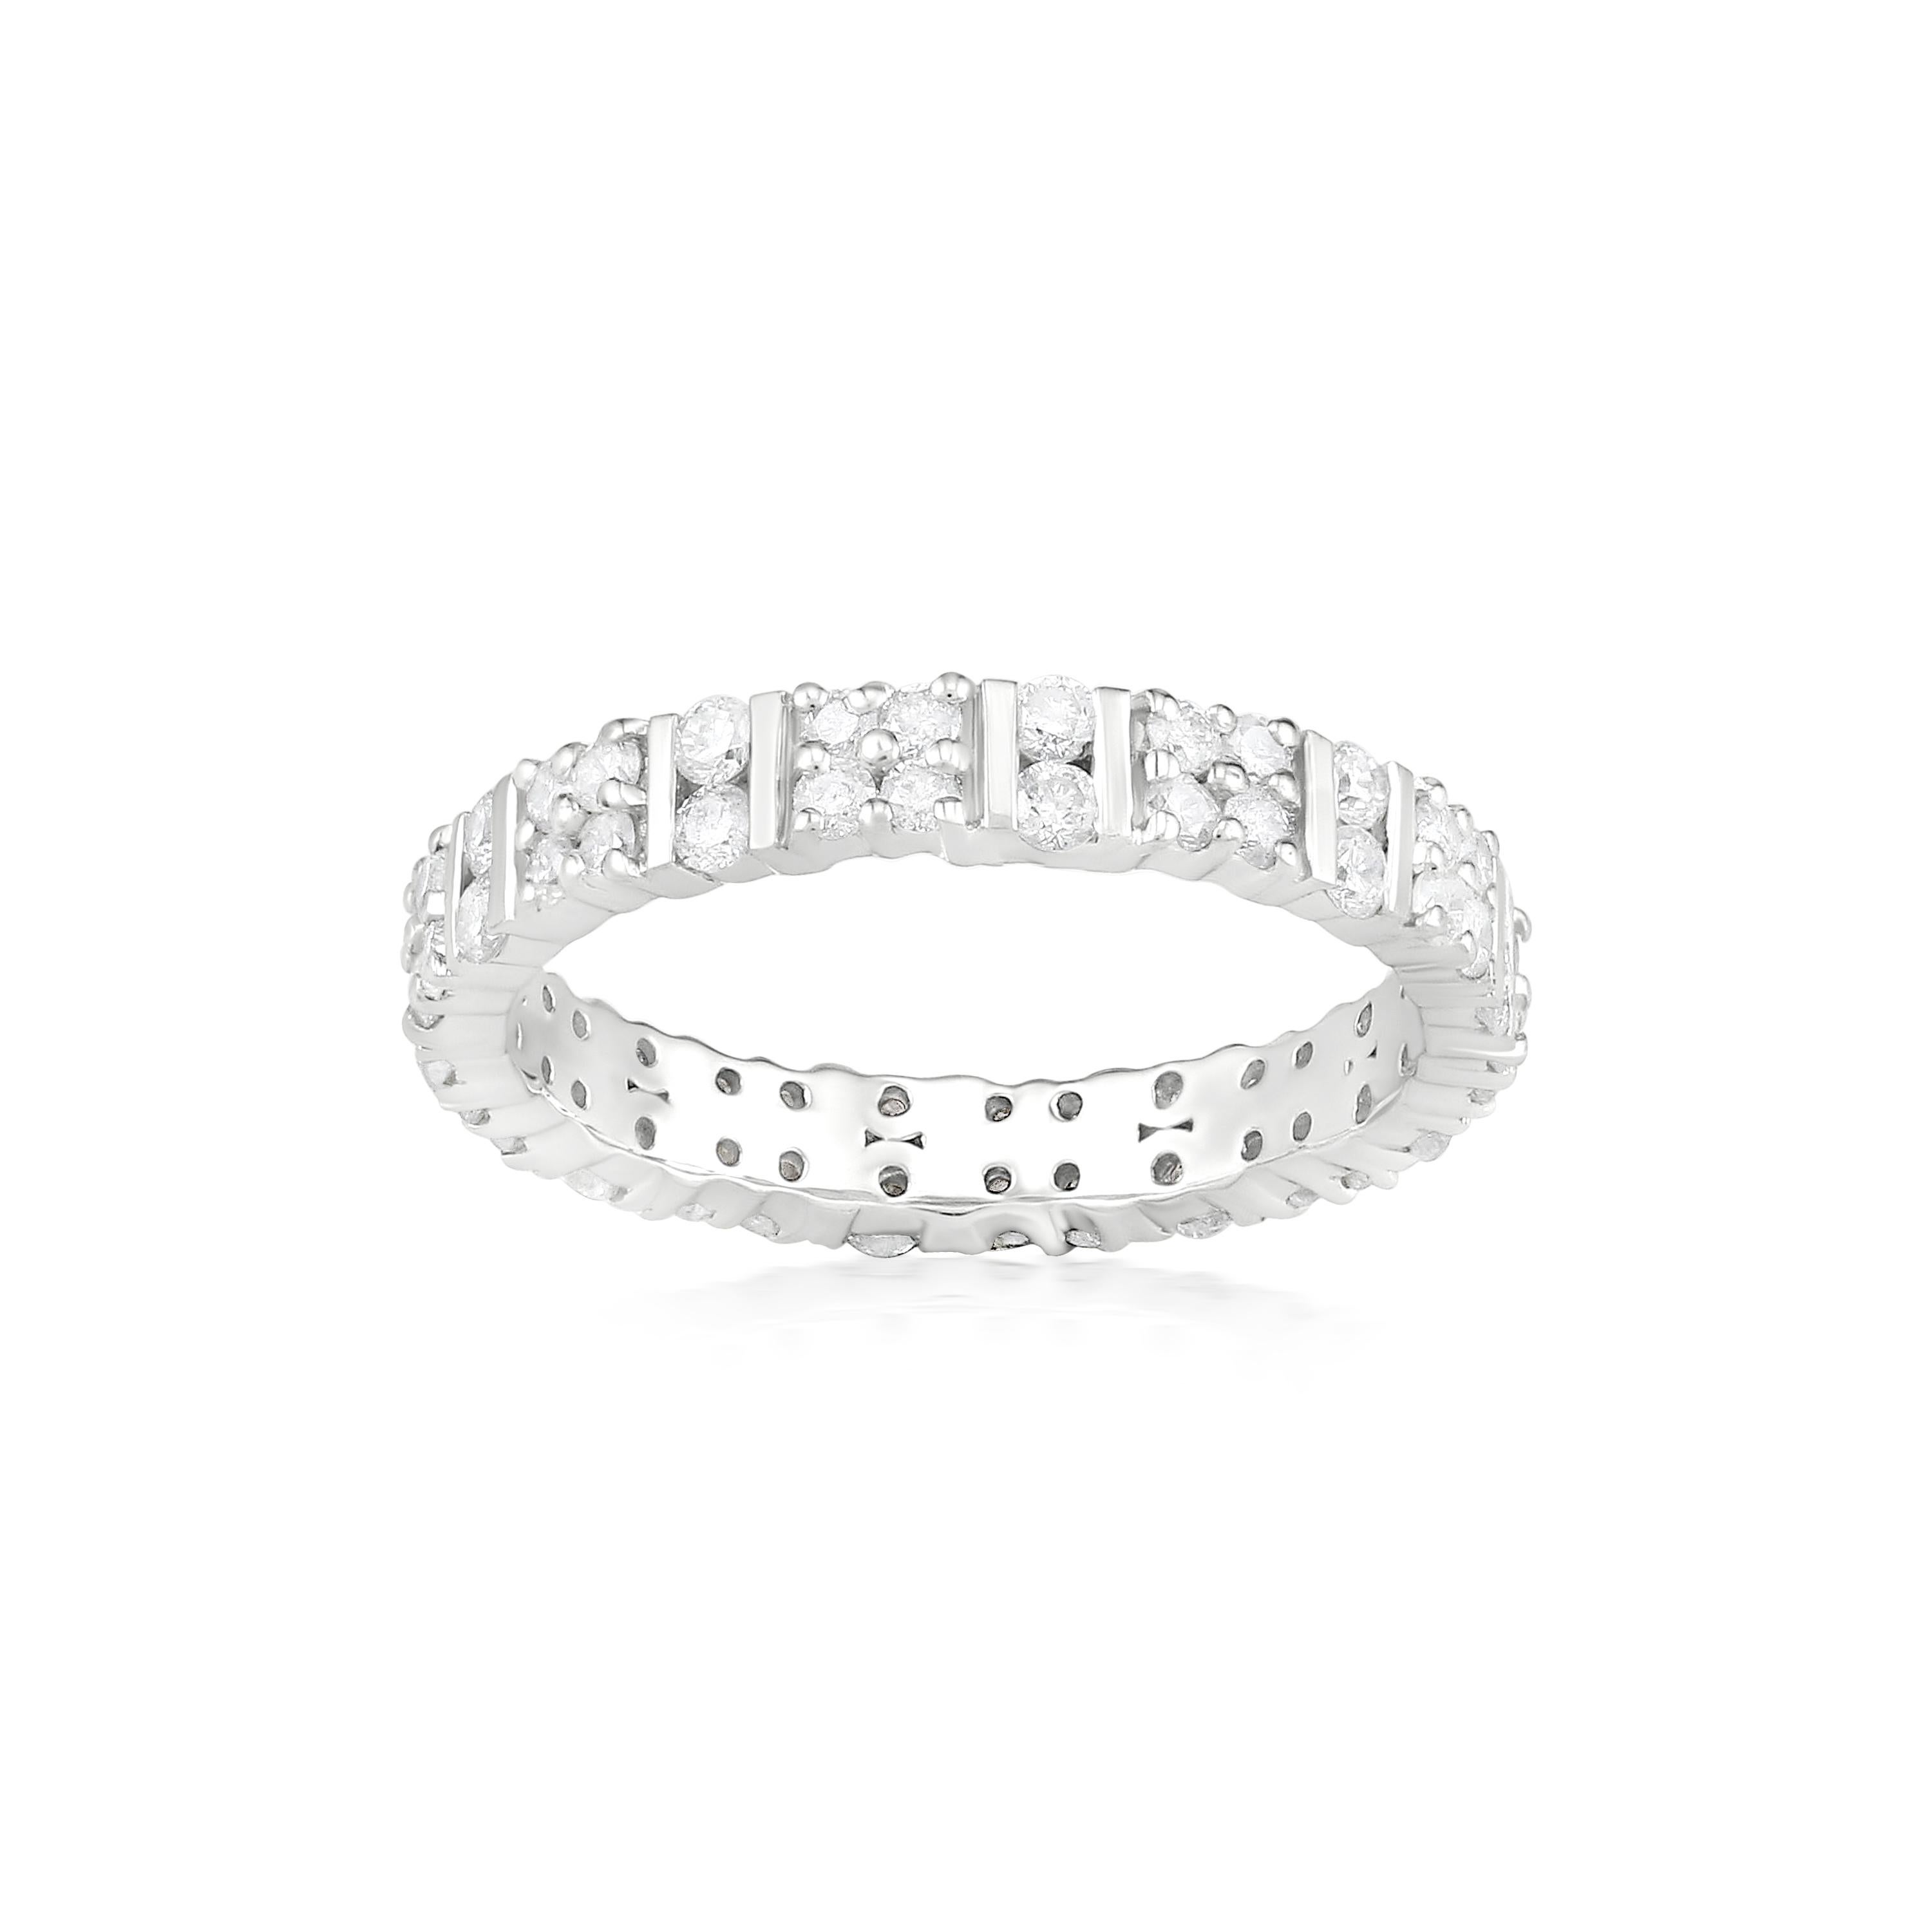 Round Cut Gemistry 1ct. T.W. Diamond Eternity Band in 925 Sterling Silver For Sale